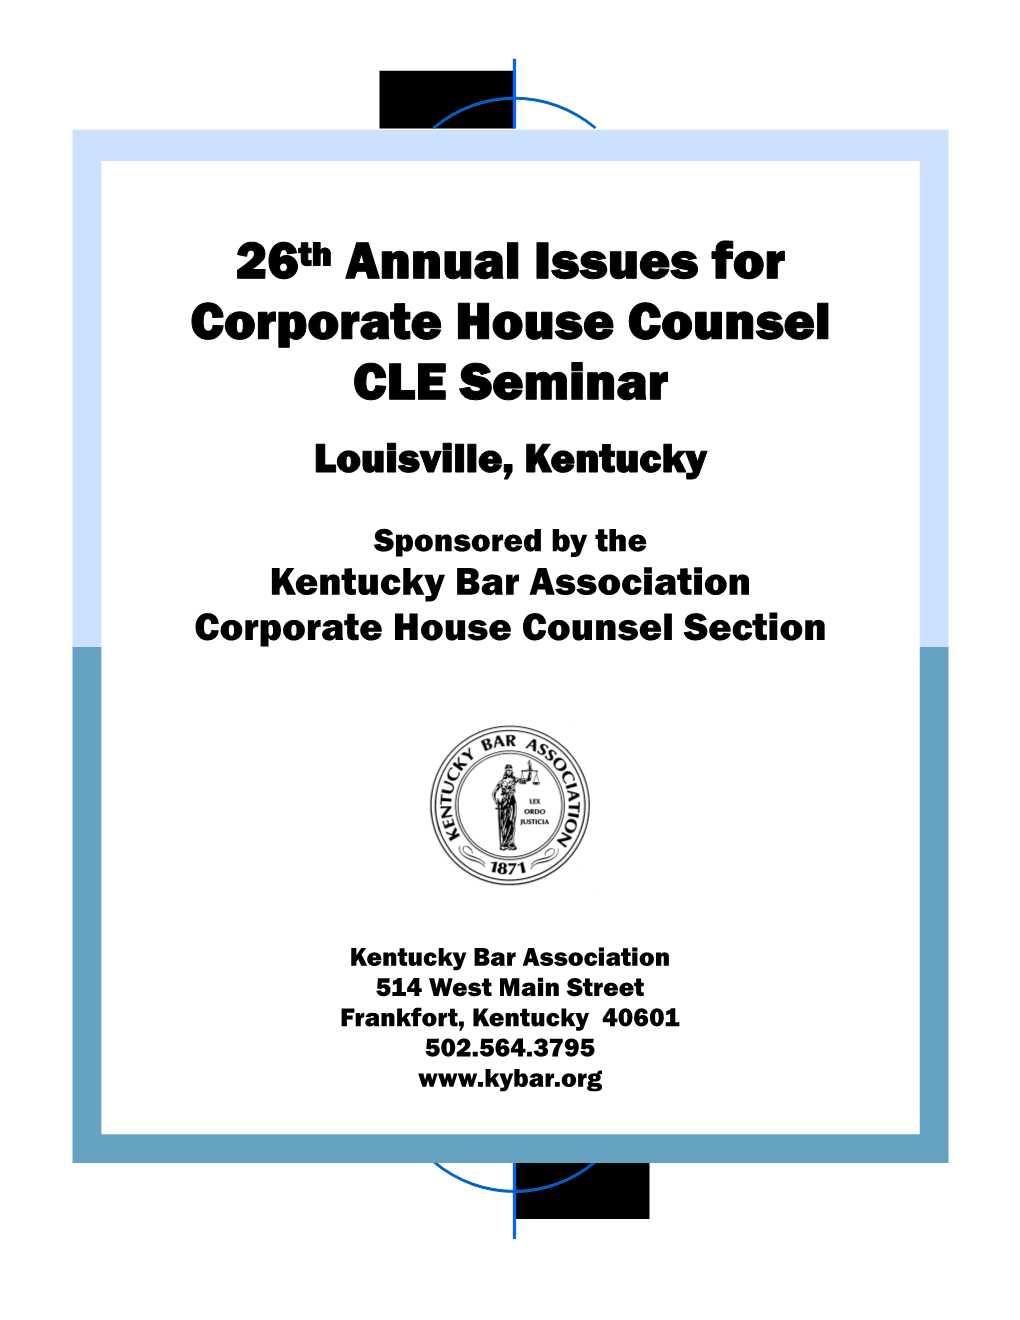 26Th Annual Issues for Corporate House Counsel CLE Seminar